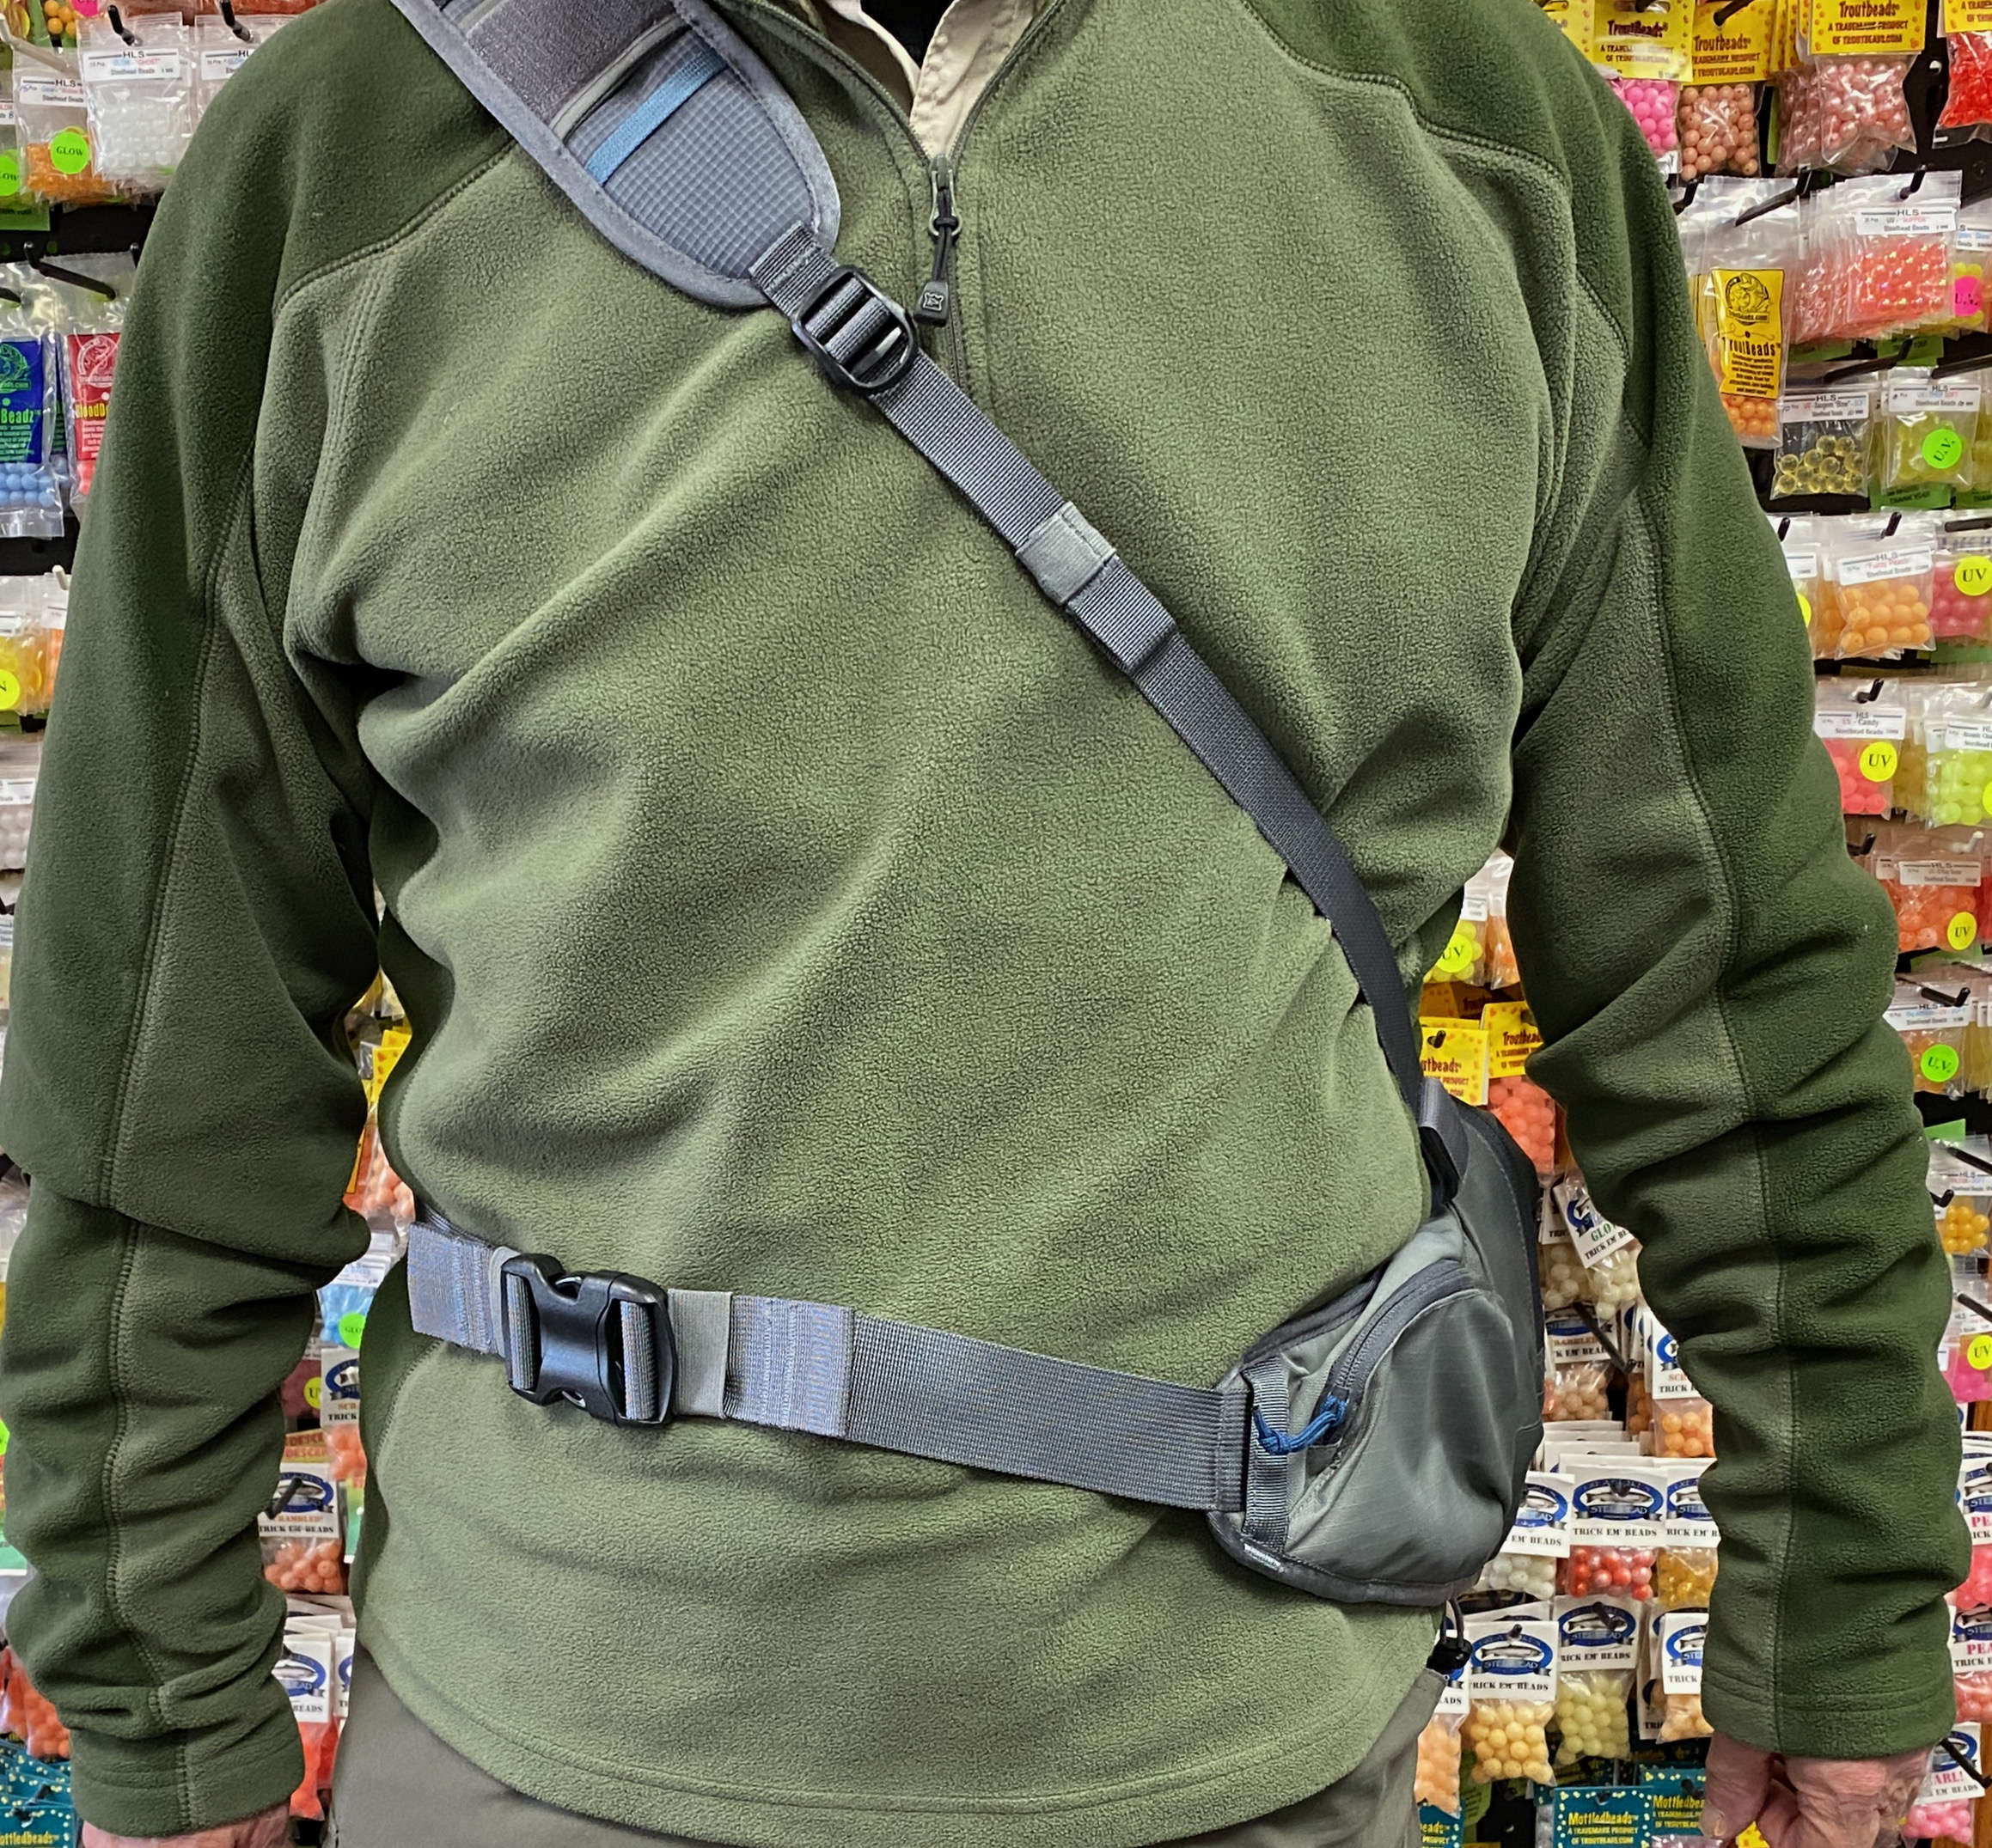 Patagonia Stealth Hip Pack - NEVER USED! - $95